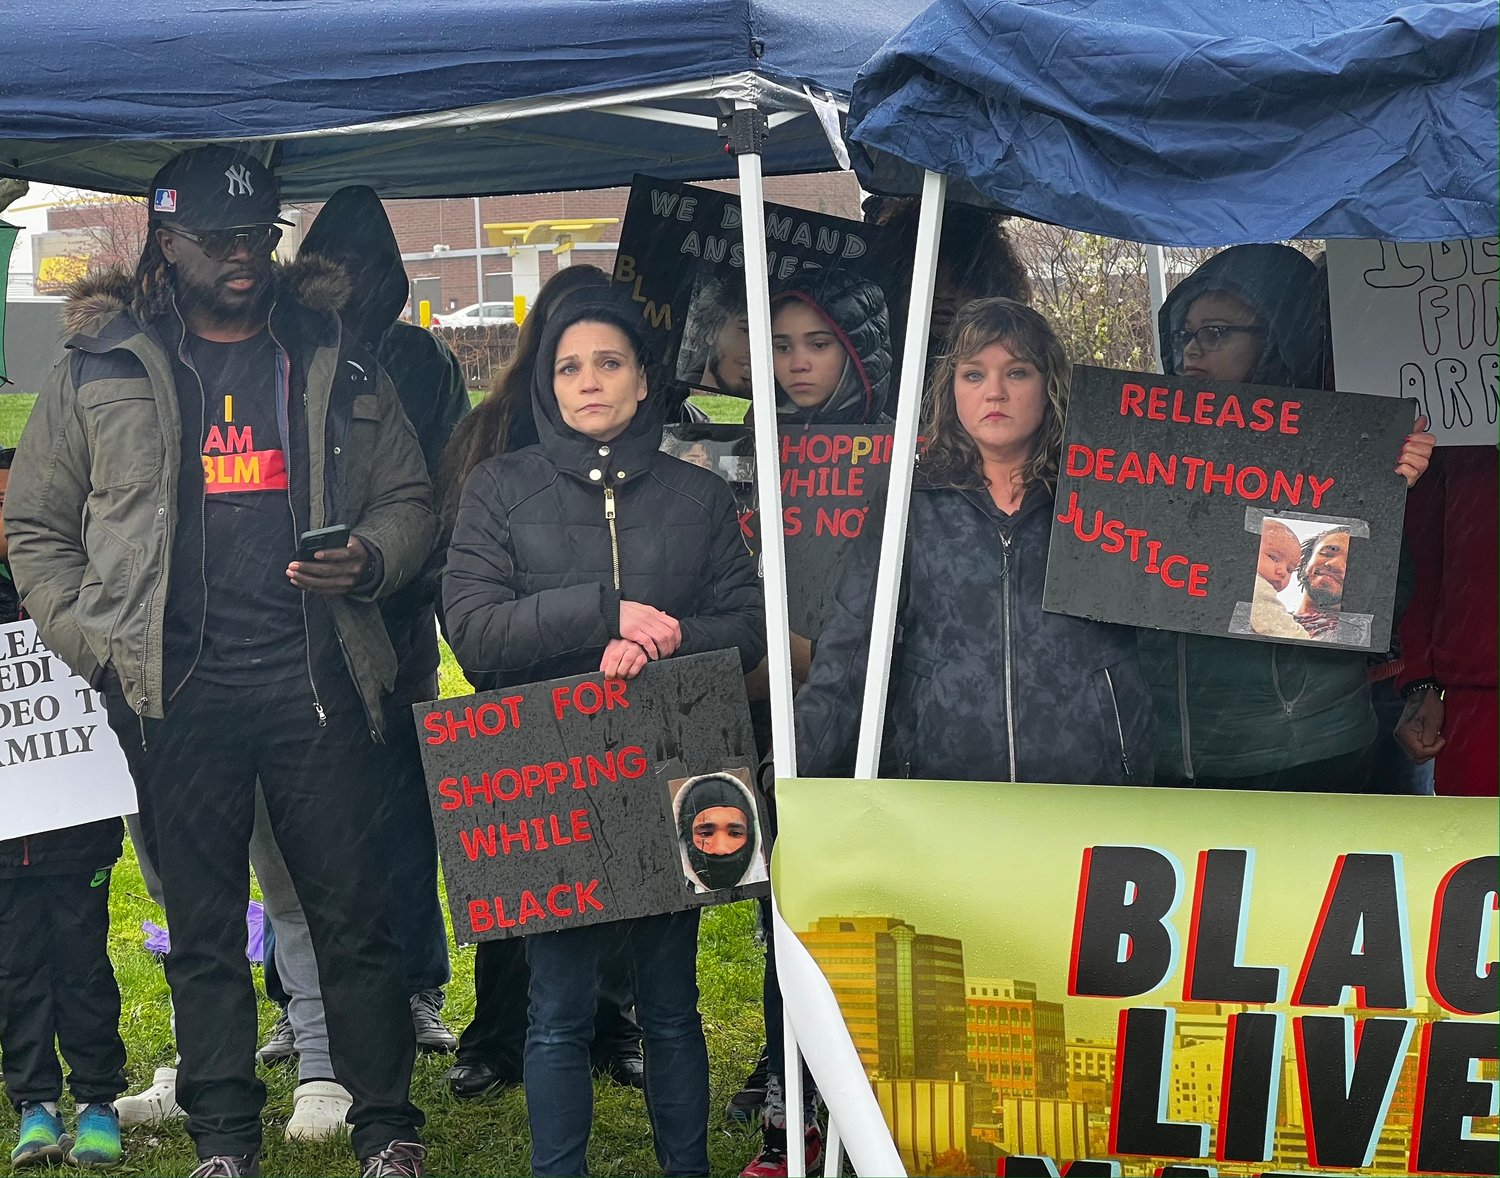 DeAnthony VanAtten’s mother, Burnette VanAtten (second from the left) joined a Black Lives Matter protest at the Ingham County Jail to demand that both officers who shot her son be fired.